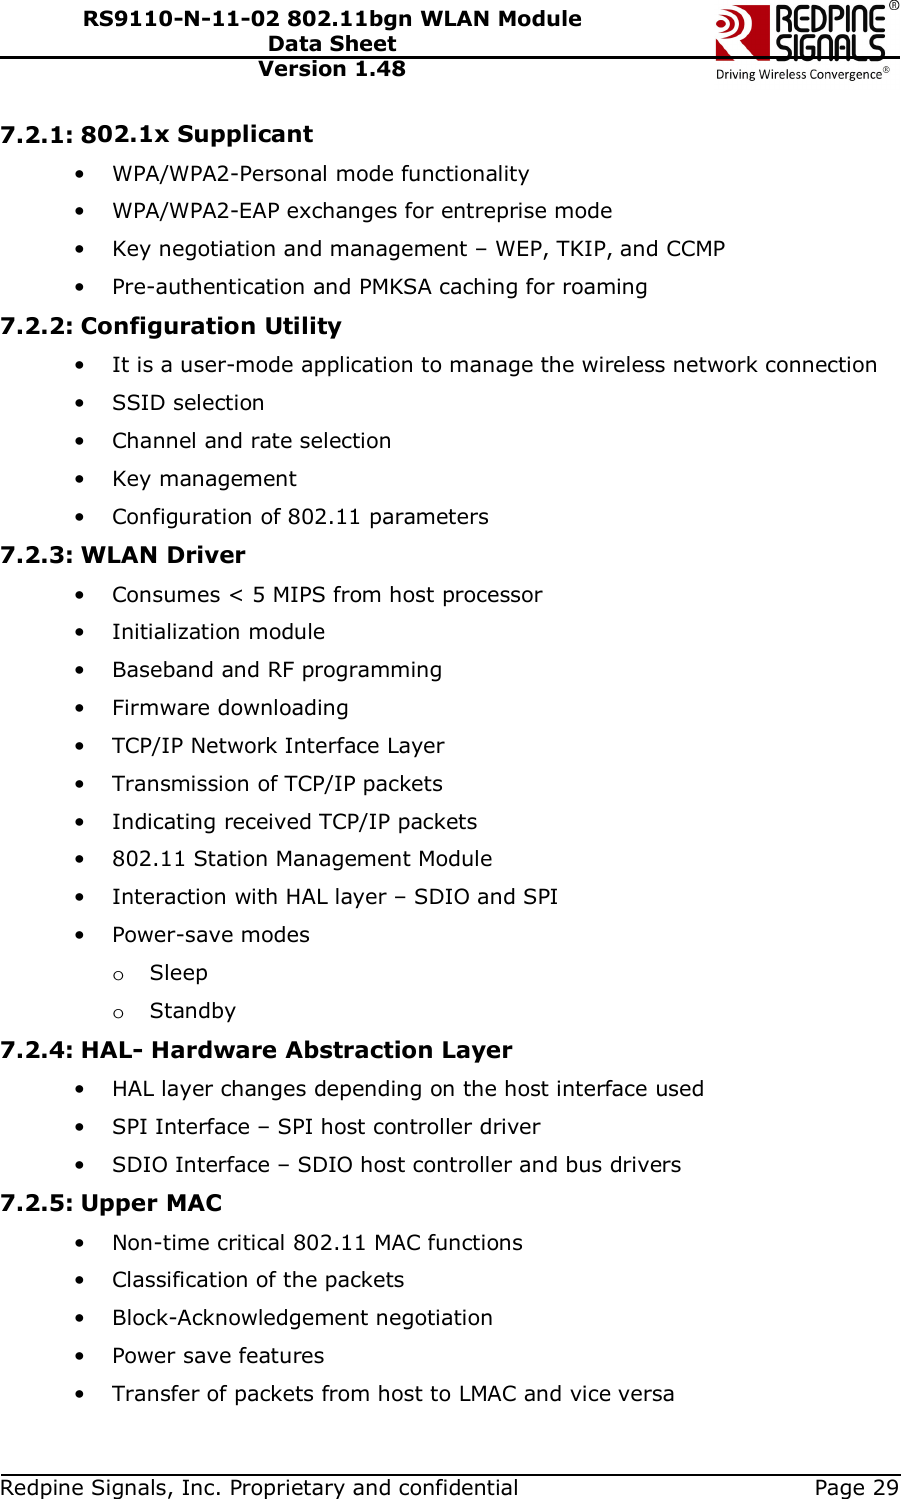   Redpine Signals, Inc. Proprietary and confidential  Page 29 RS9110-N-11-02 802.11bgn WLAN Module Data Sheet Version 1.48 7.2.1: 802.1x Supplicant • WPA/WPA2-Personal mode functionality • WPA/WPA2-EAP exchanges for entreprise mode • Key negotiation and management – WEP, TKIP, and CCMP • Pre-authentication and PMKSA caching for roaming 7.2.2: Configuration Utility • It is a user-mode application to manage the wireless network connection • SSID selection • Channel and rate selection • Key management • Configuration of 802.11 parameters 7.2.3: WLAN Driver • Consumes &lt; 5 MIPS from host processor • Initialization module • Baseband and RF programming • Firmware downloading • TCP/IP Network Interface Layer • Transmission of TCP/IP packets • Indicating received TCP/IP packets • 802.11 Station Management Module • Interaction with HAL layer – SDIO and SPI • Power-save modes o Sleep o Standby 7.2.4: HAL- Hardware Abstraction Layer • HAL layer changes depending on the host interface used • SPI Interface – SPI host controller driver • SDIO Interface – SDIO host controller and bus drivers 7.2.5: Upper MAC • Non-time critical 802.11 MAC functions • Classification of the packets • Block-Acknowledgement negotiation • Power save features • Transfer of packets from host to LMAC and vice versa 